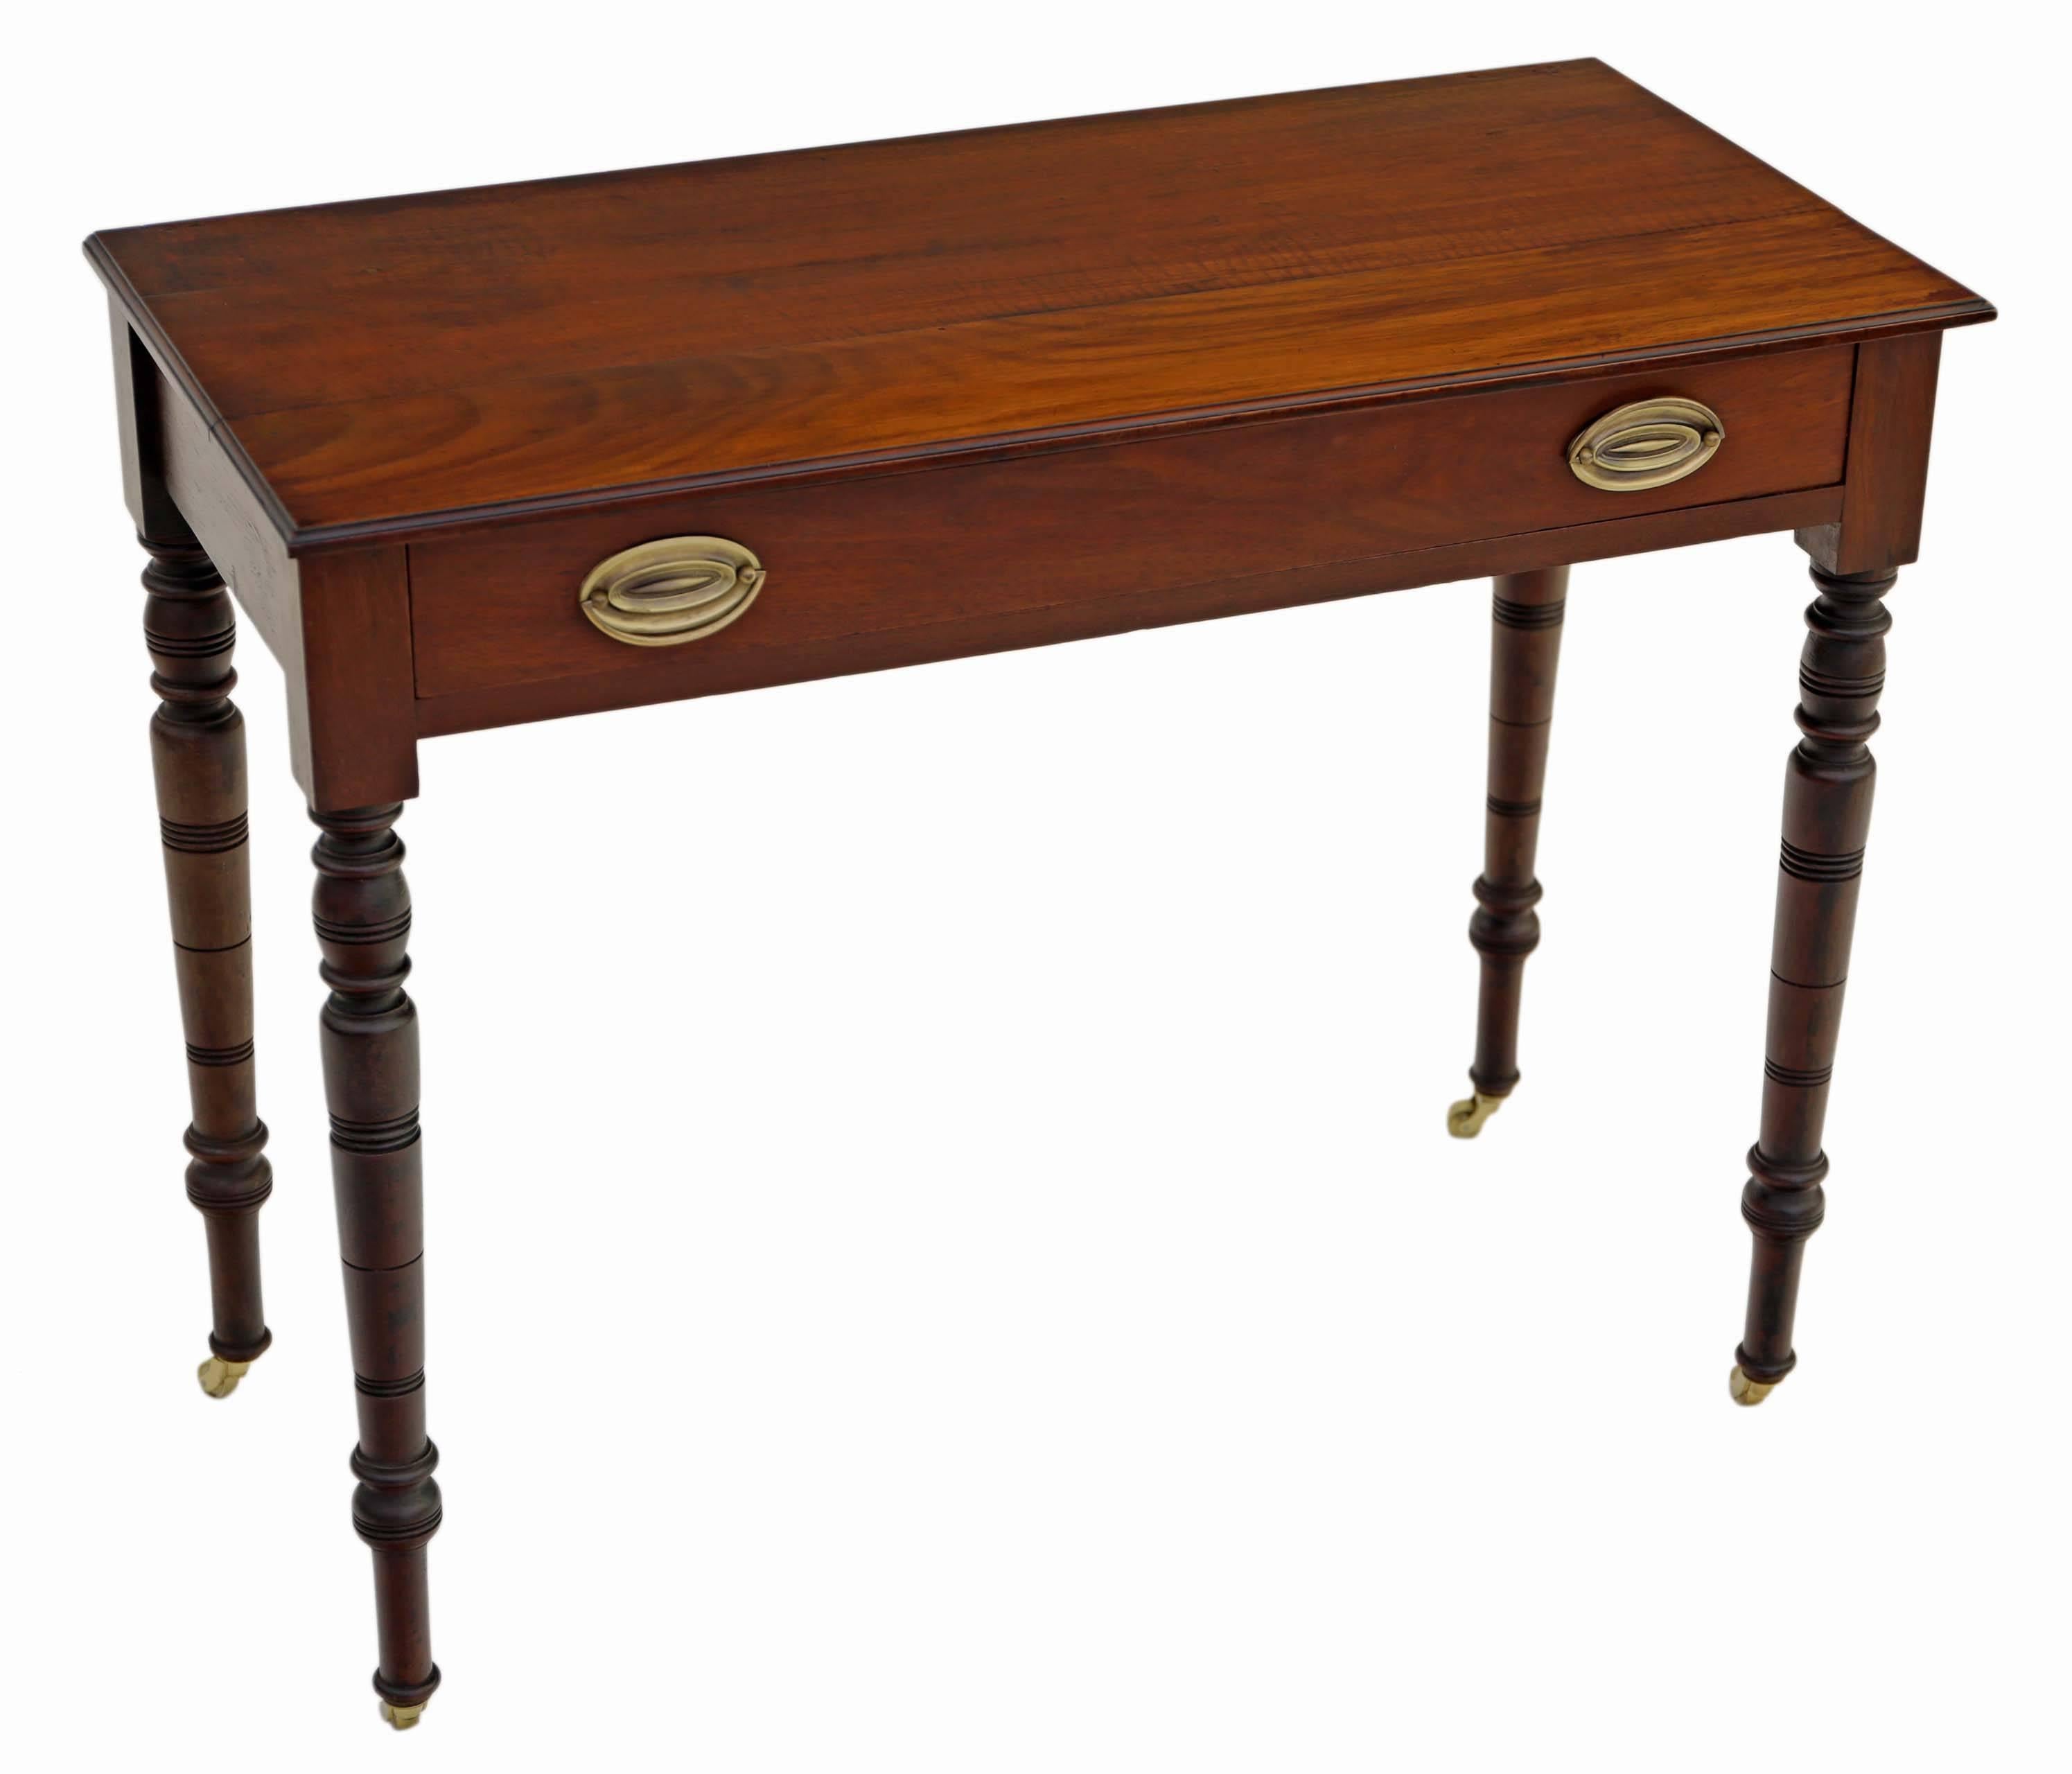 Antique Victorian circa 1900 walnut side writing occasional table desk.

Fabulous proportions, color age and patina. No woodworm.

The table is solid, with no loose joints and the drawer slides freely.

Overall dimensions 89.5cm W x 43cm D x